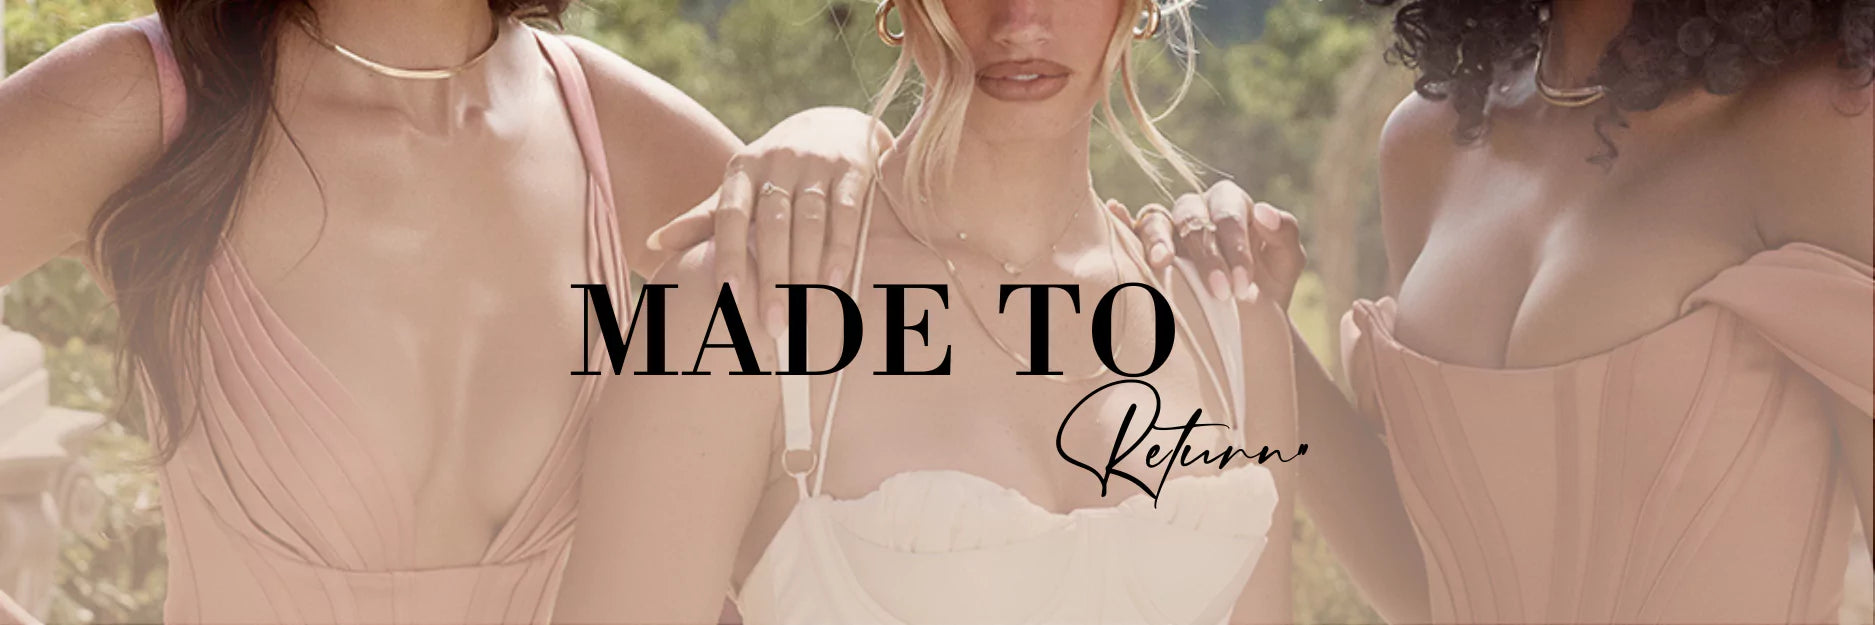 Made To Return - Dress for rental South Africa